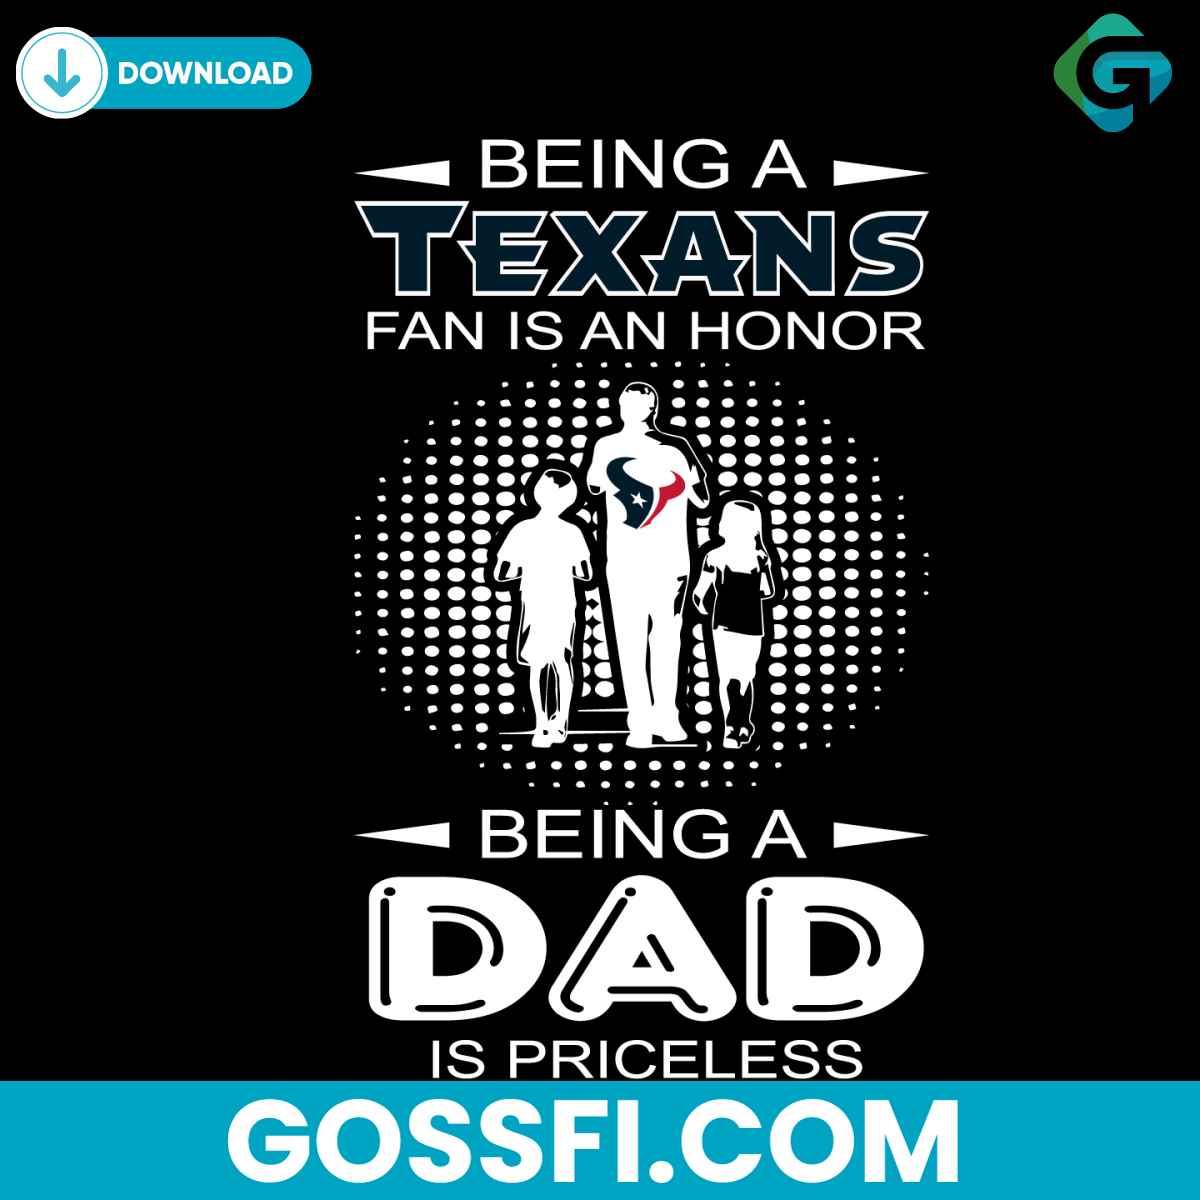 being-a-texans-fan-is-an-honor-being-a-dad-is-priceless-svg